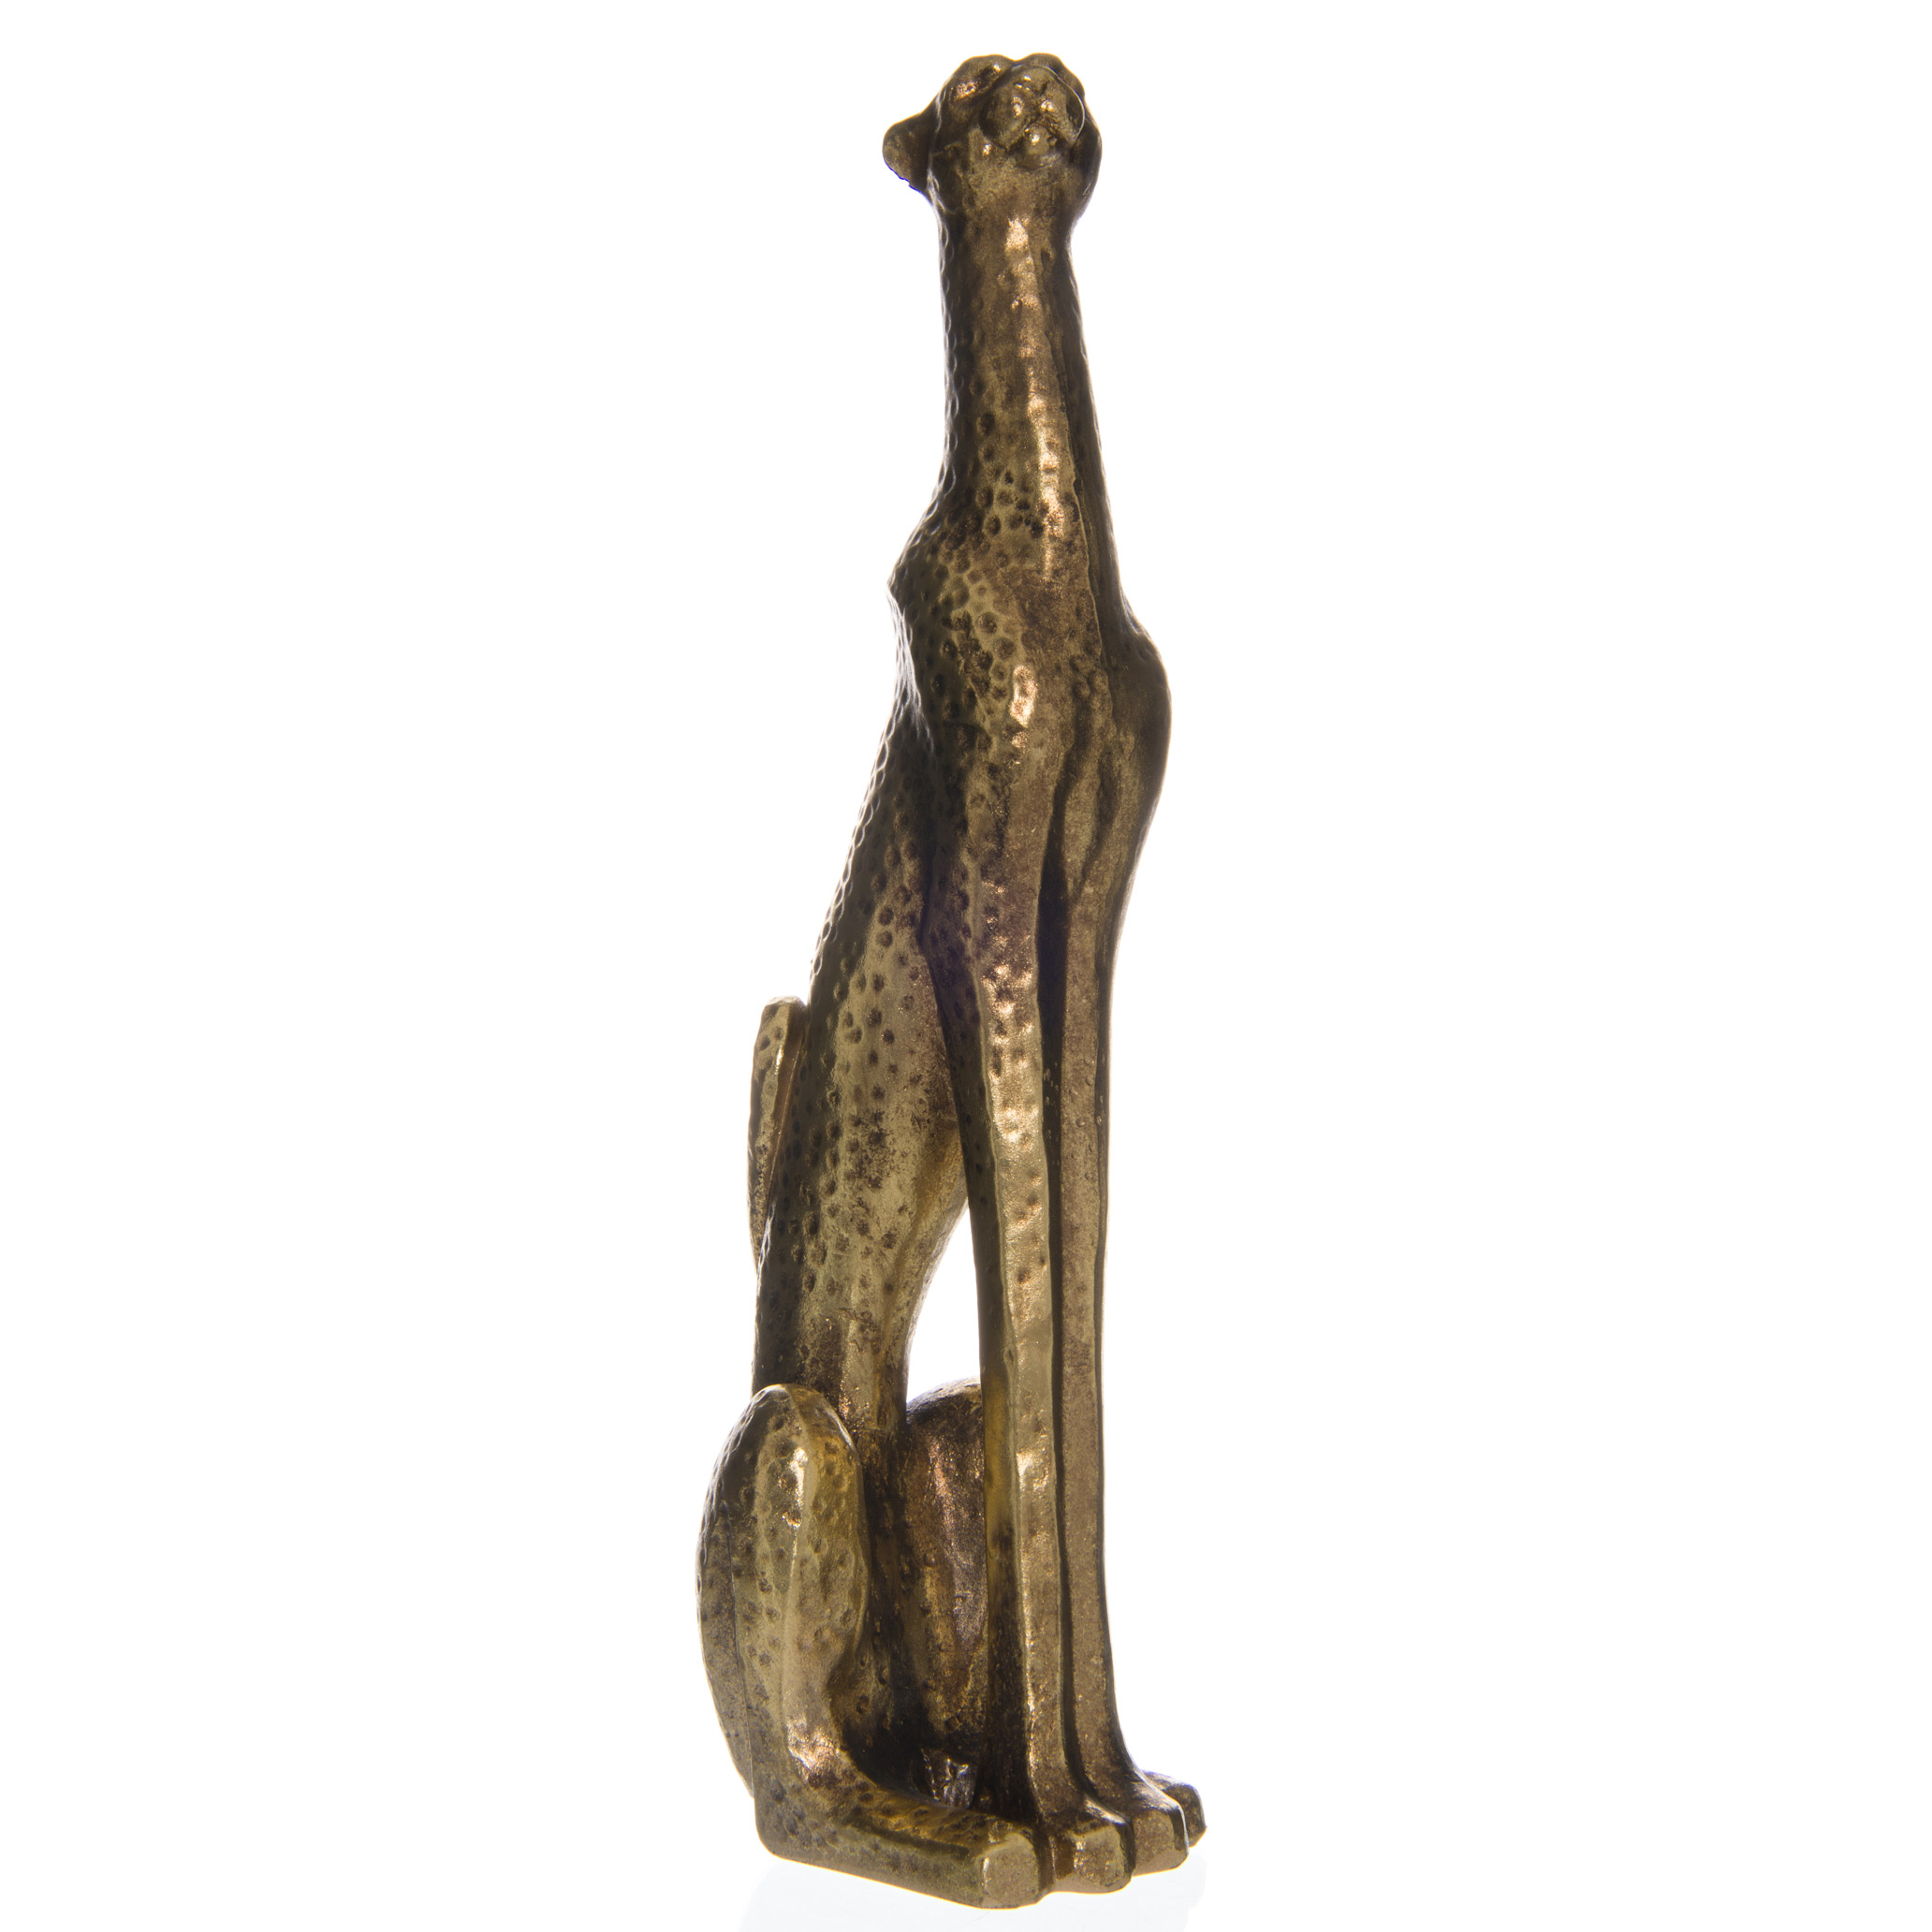 Gold Leopard Standing Ornament - Image 1